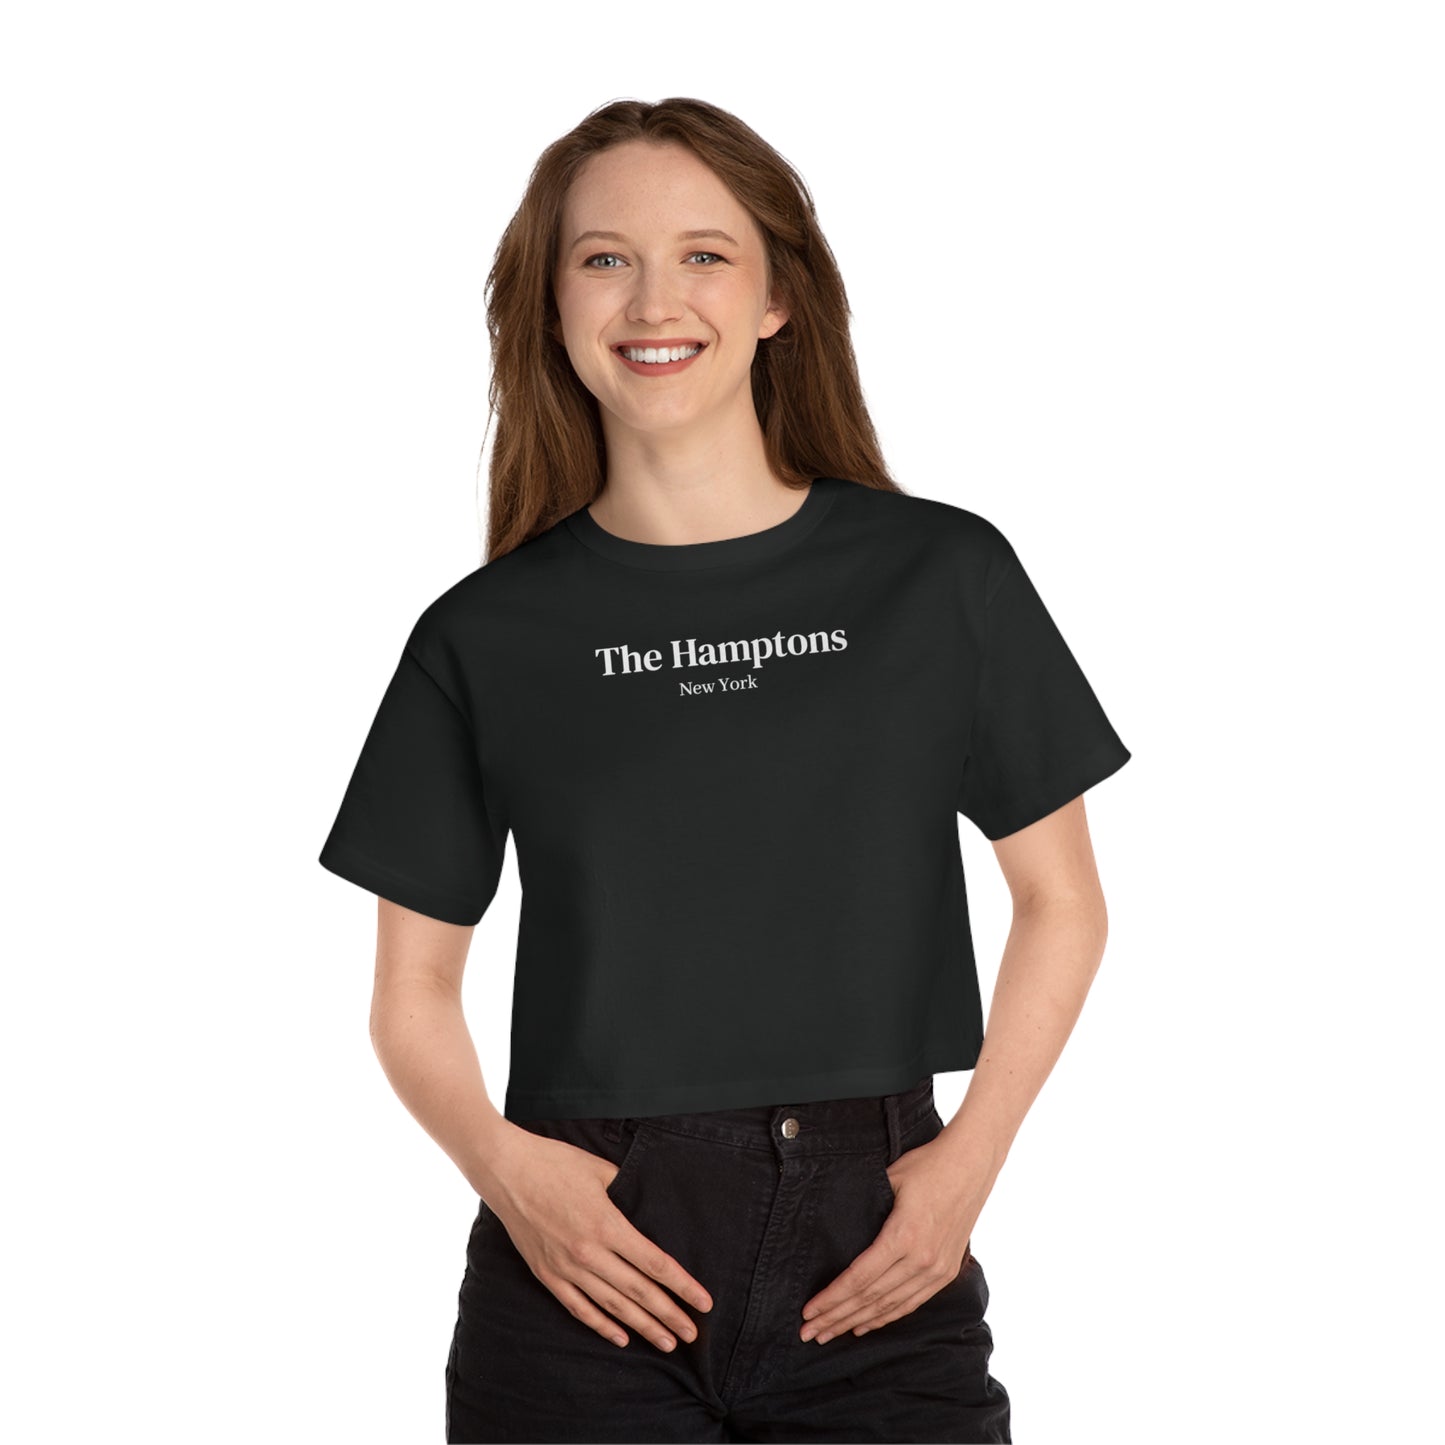 Copy of Champion Women's Heritage Cropped T-Shirt